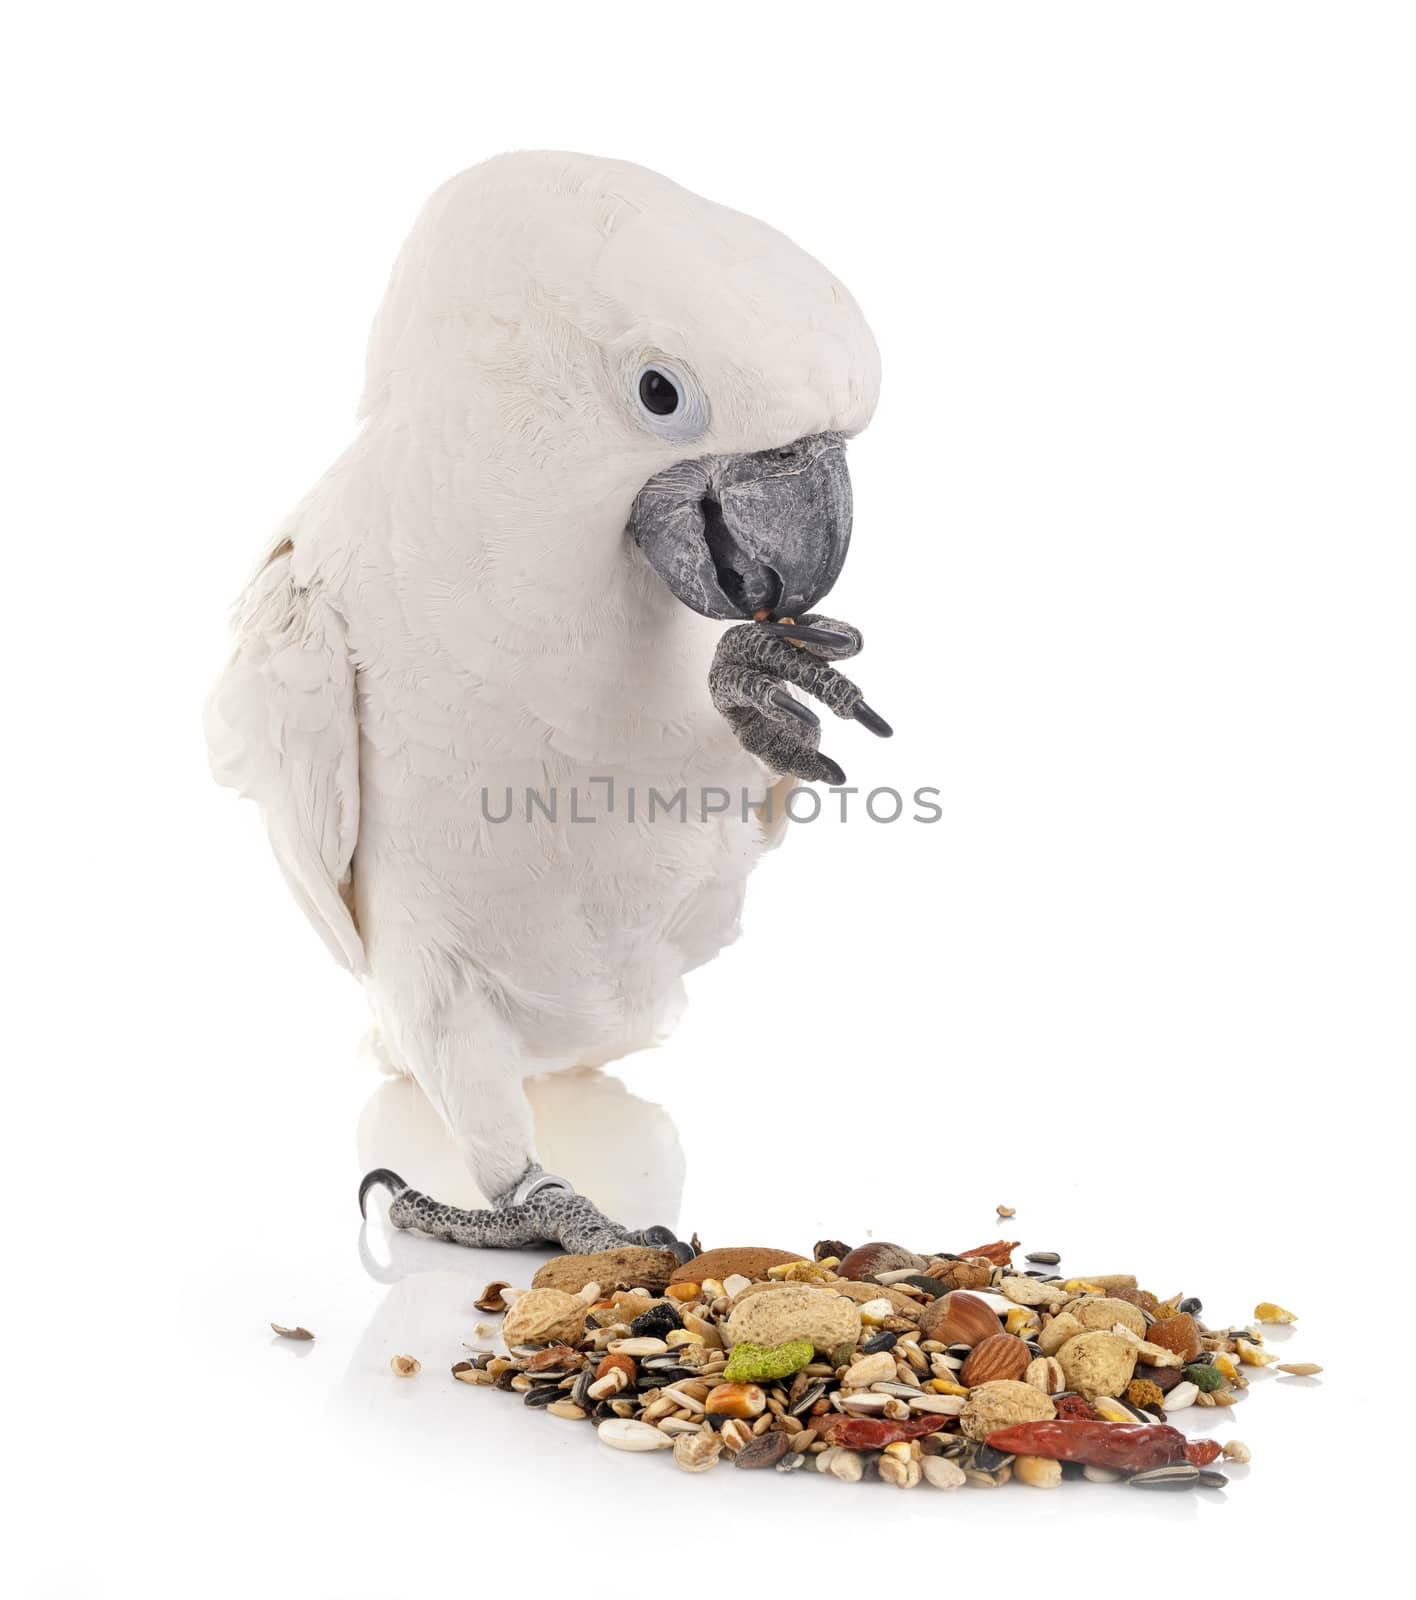 White cockatoo in front of white background